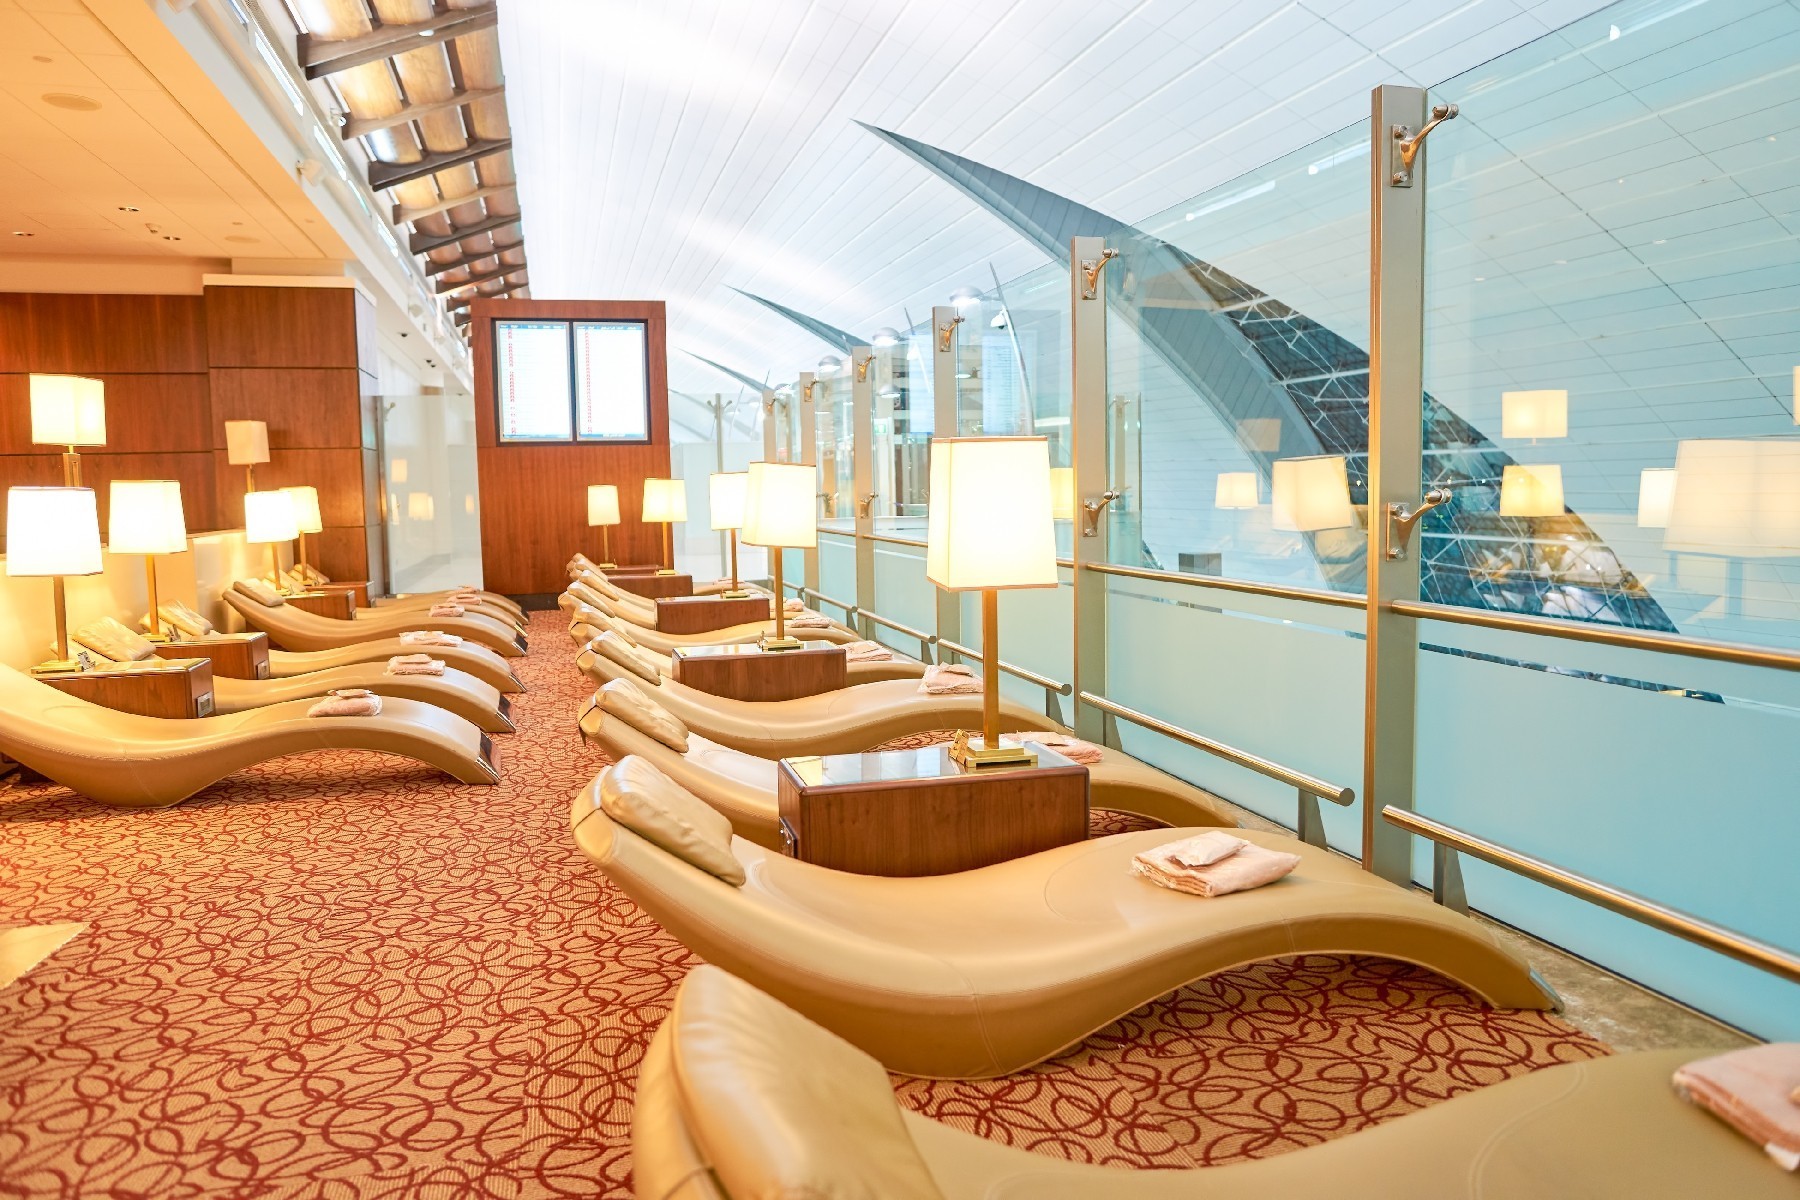 <p>Unless you are a frequent flyer, you probably don’t pay the hundreds of dollars necessary to get access to <a href="https://www.rd.com/advice/travel/air-travel-tips/" rel="noreferrer noopener">airline lounges</a>. However, if you’re on a long layover, reasonably priced day passes ($60 or less) are available for Admirals Club, Sky Club and United Club lounges. Amenities include complimentary snacks and drinks, Wi-Fi, shower suites and more.</p>